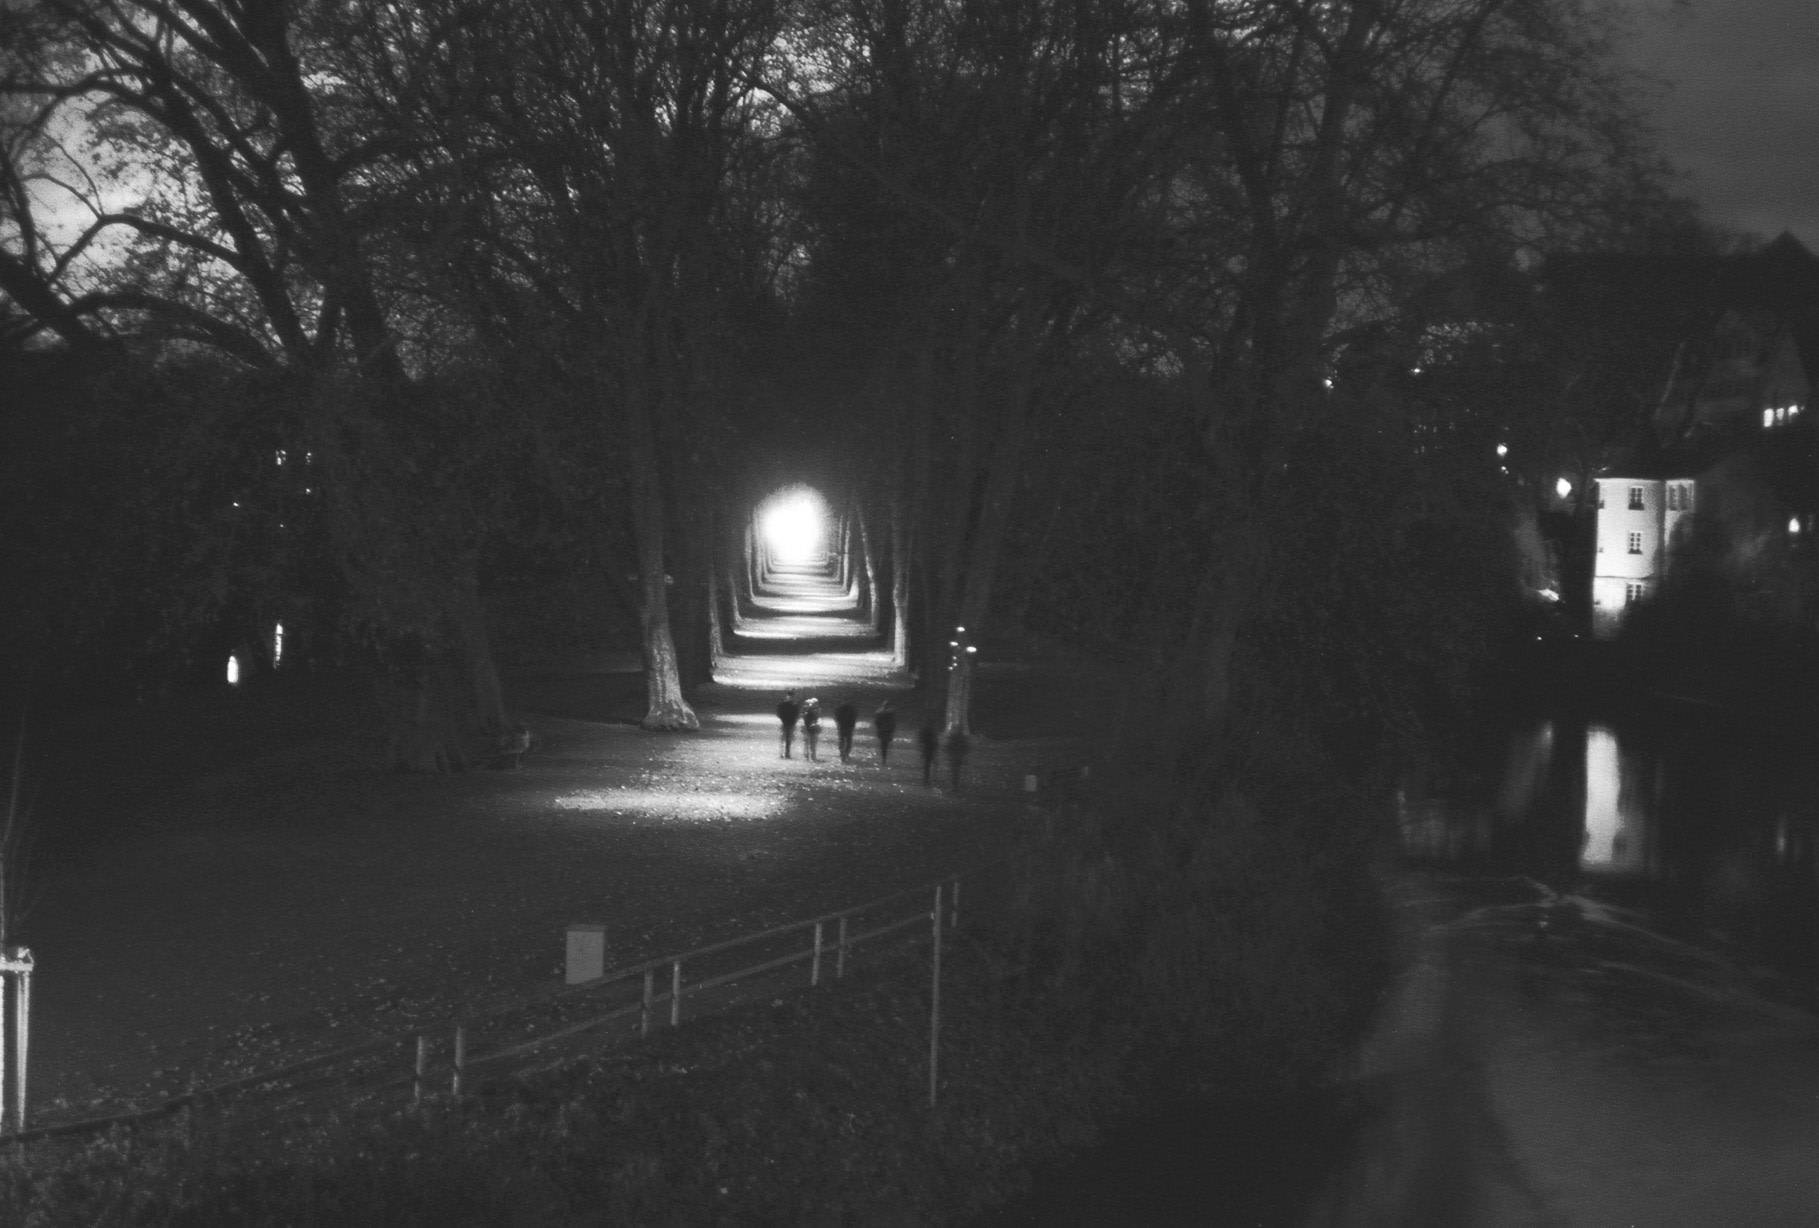 silhouettes of several people walking down the path through the trees, it is very dark around and the light coming from the end of path seems to light up the scene